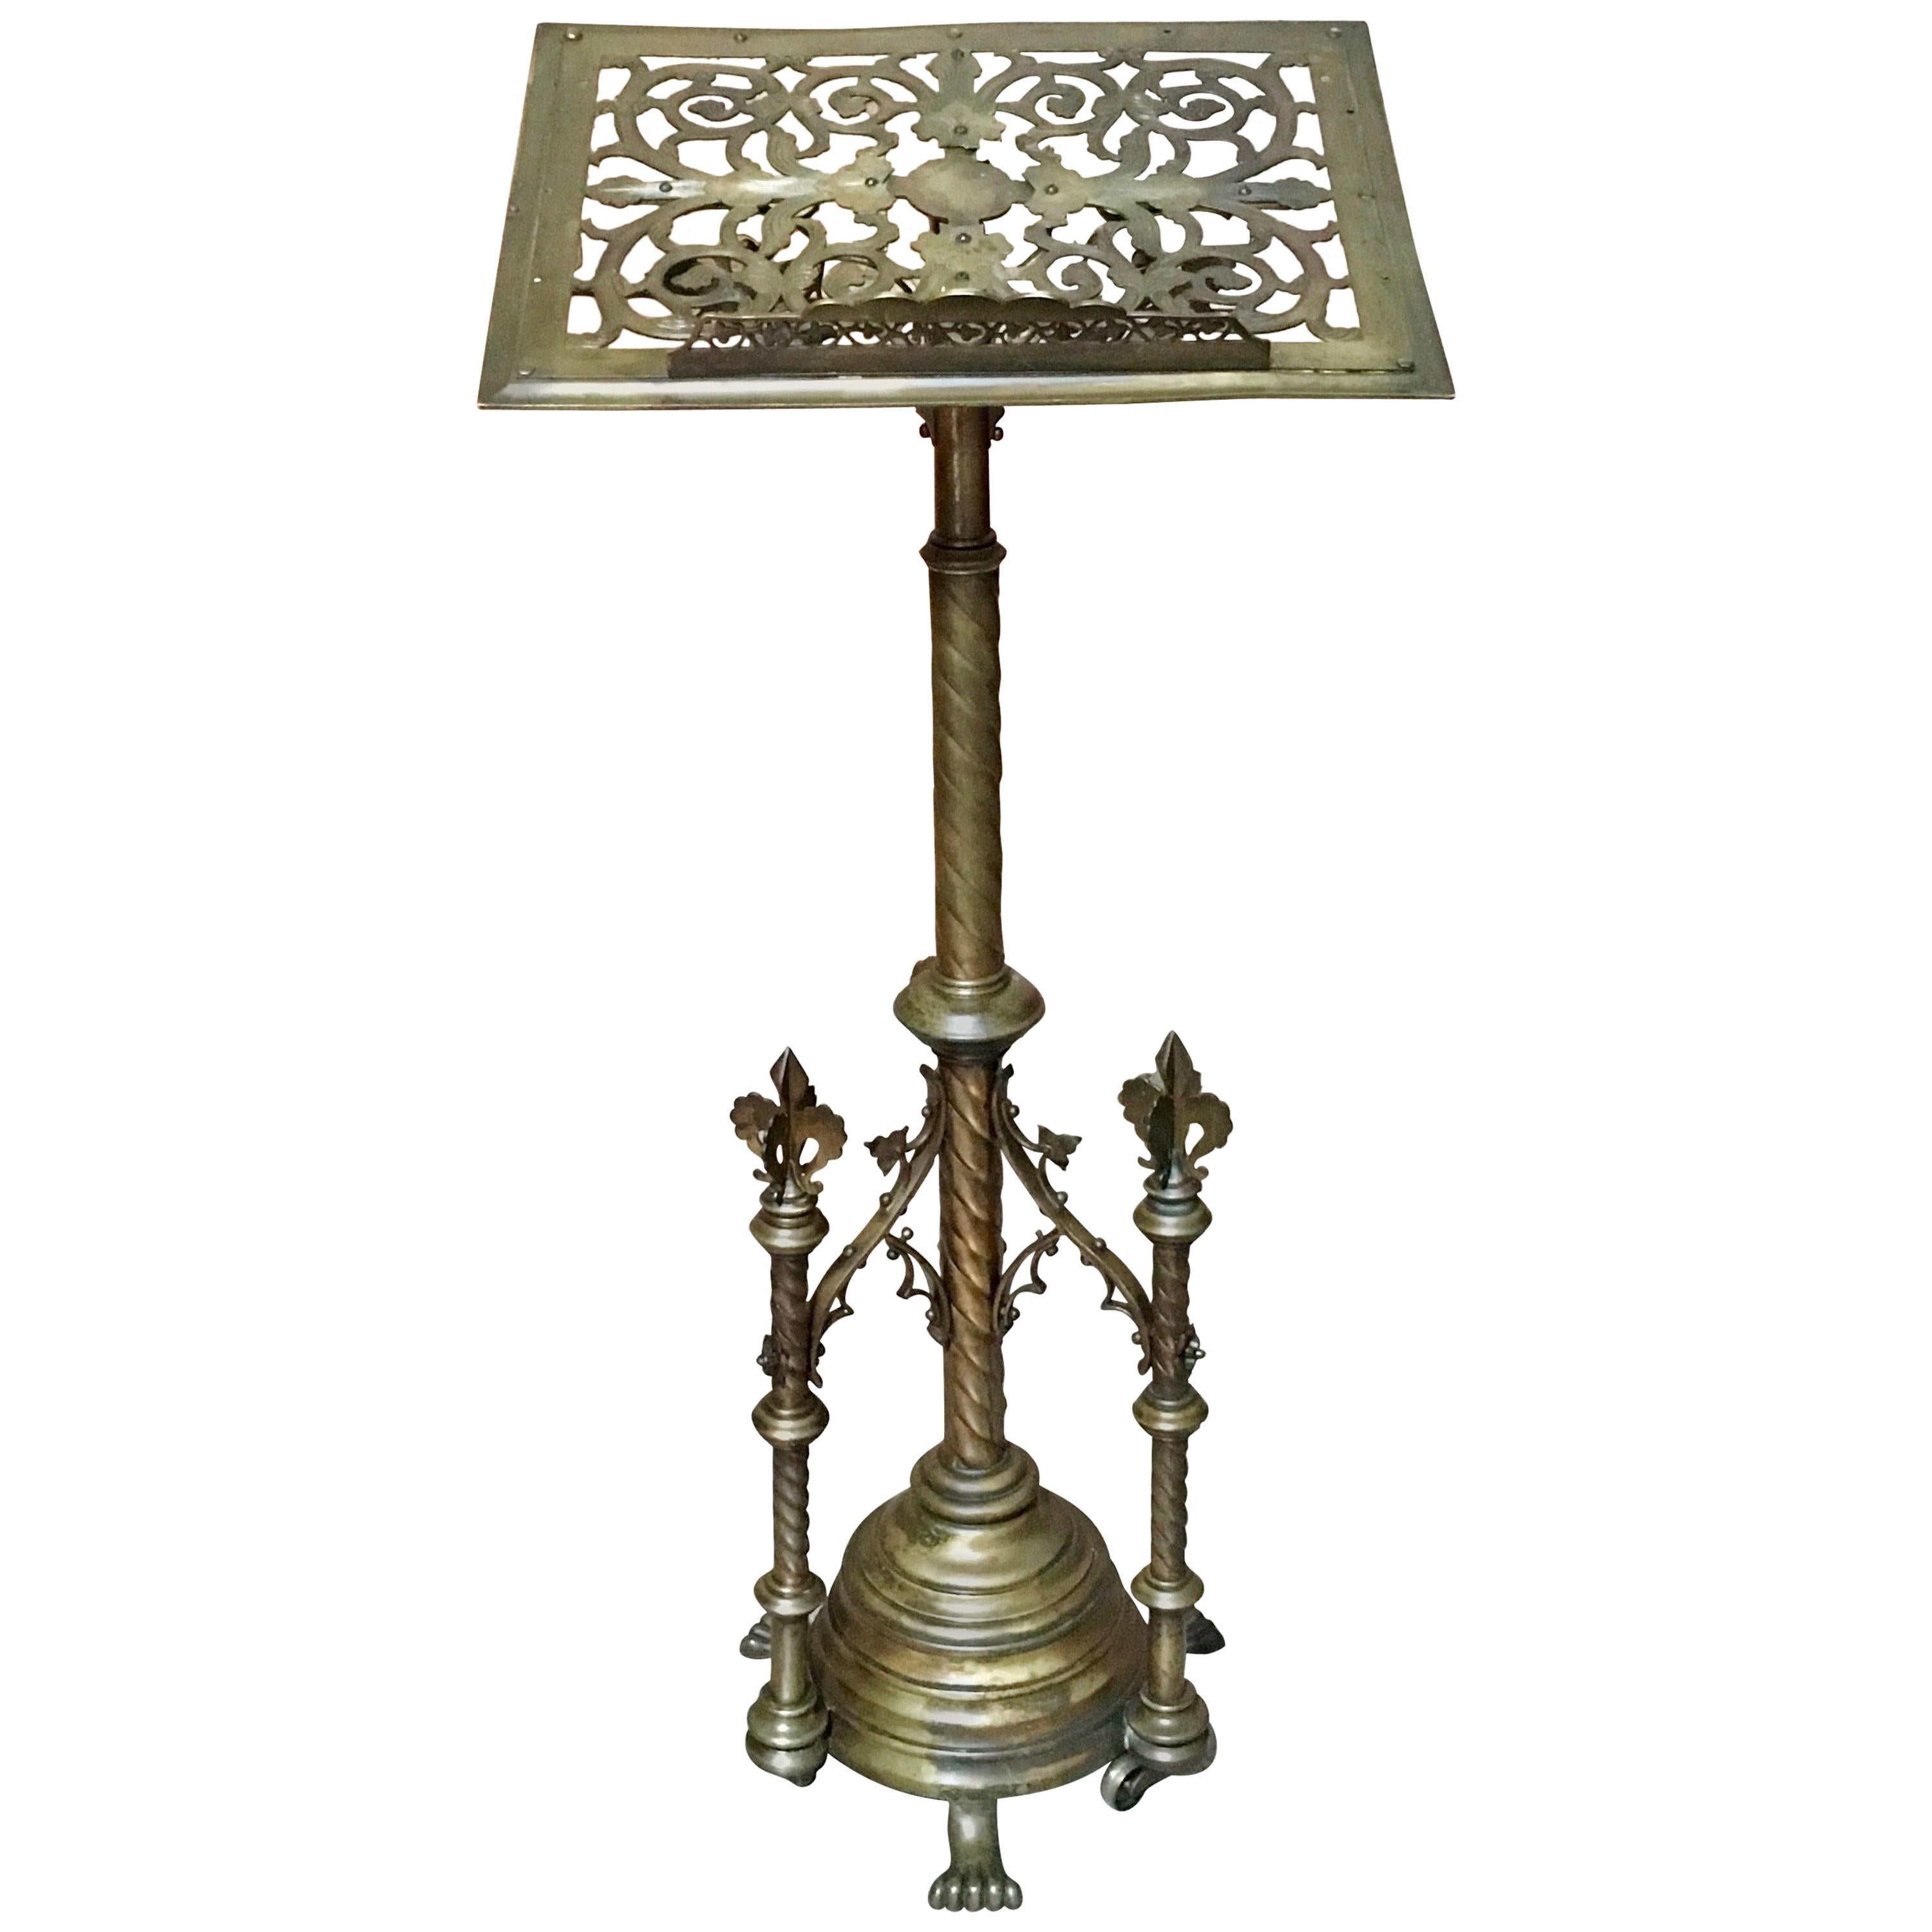 Gothic style Brass Lectern